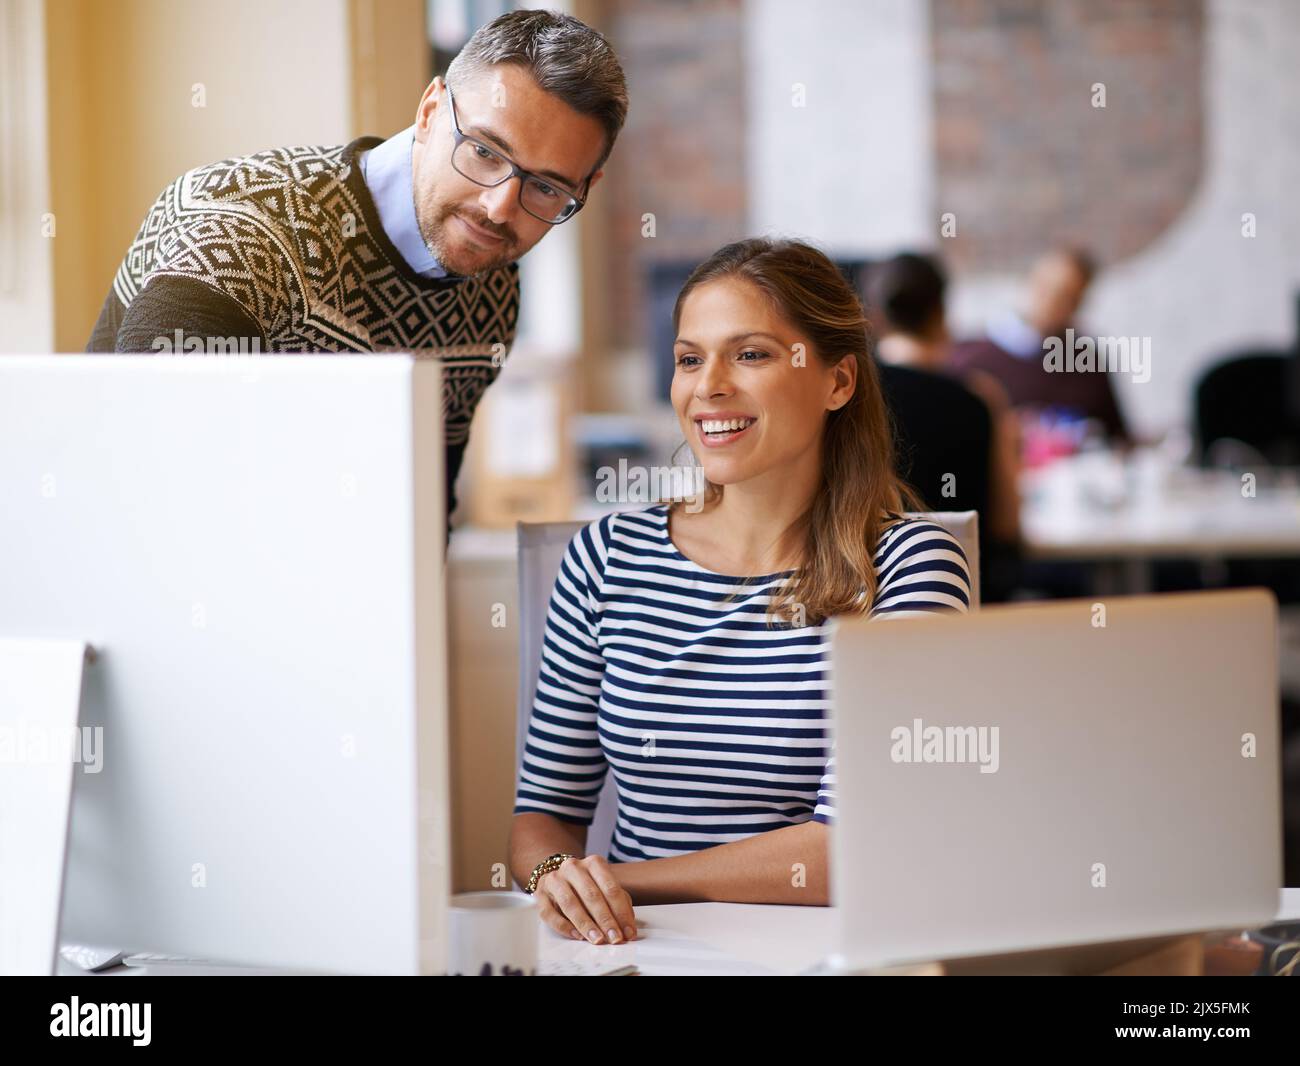 Playing around with different designs. two designers working together at a computer. Stock Photo